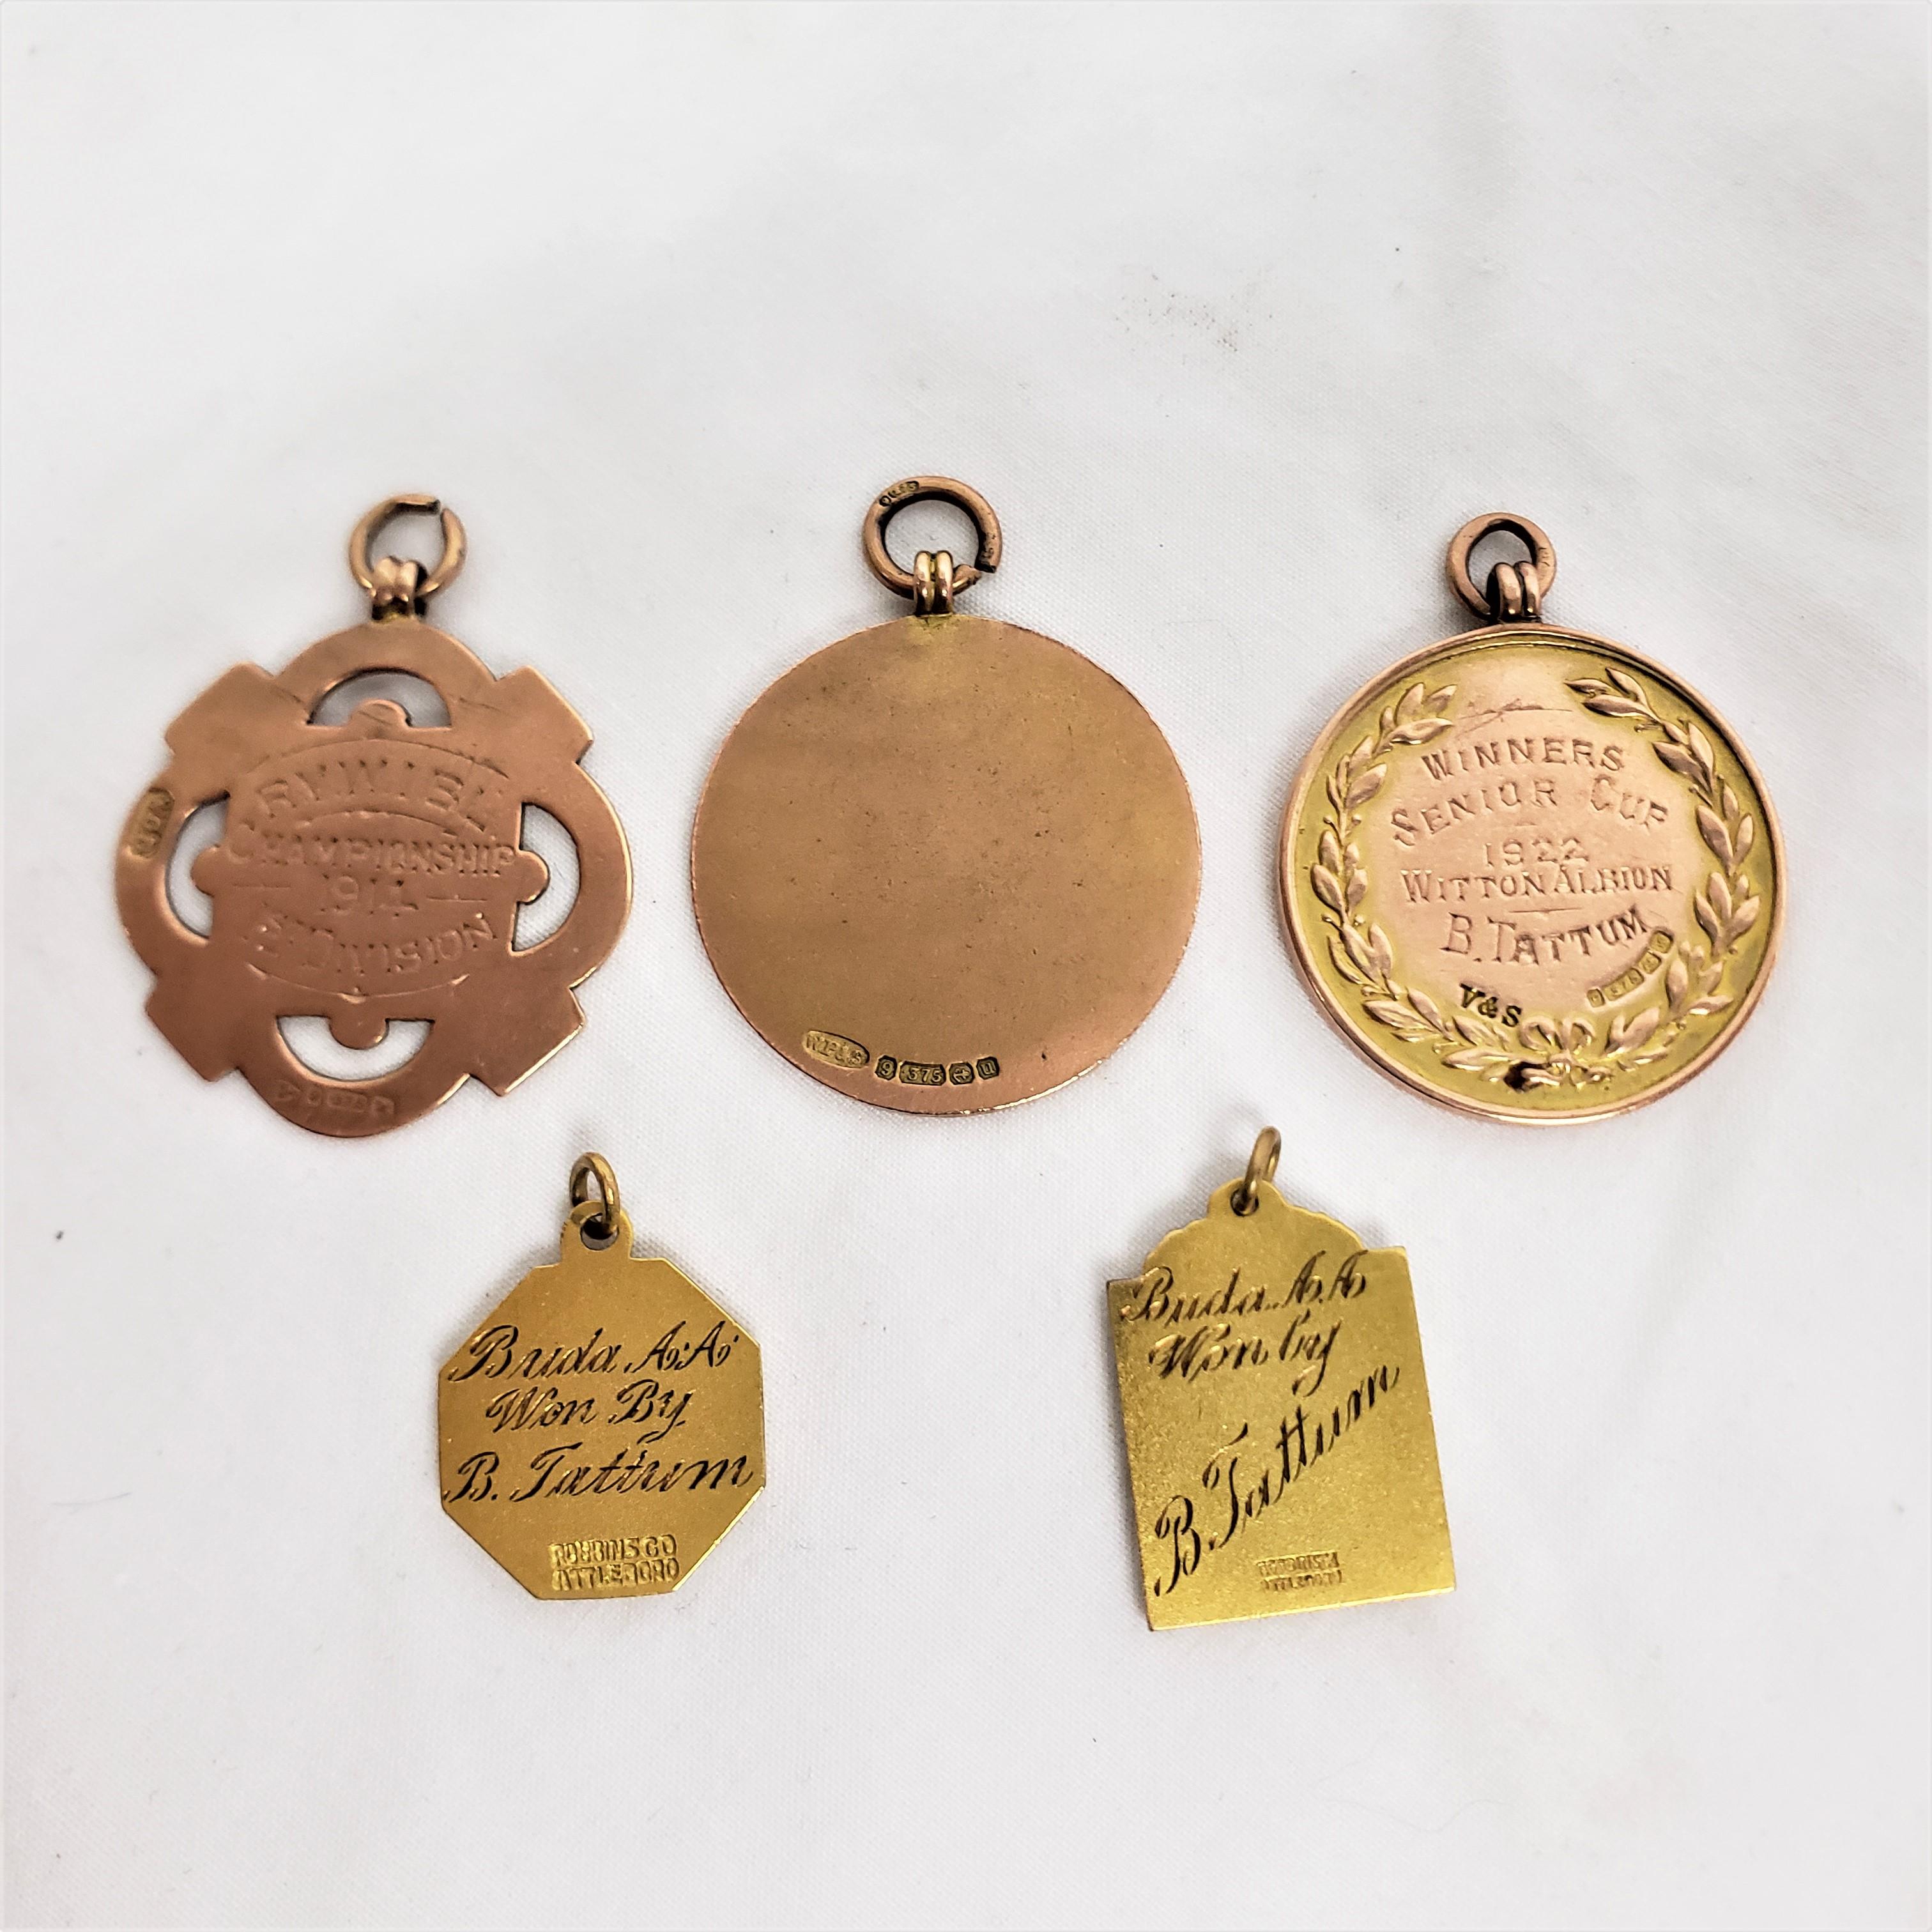 old football medals for sale